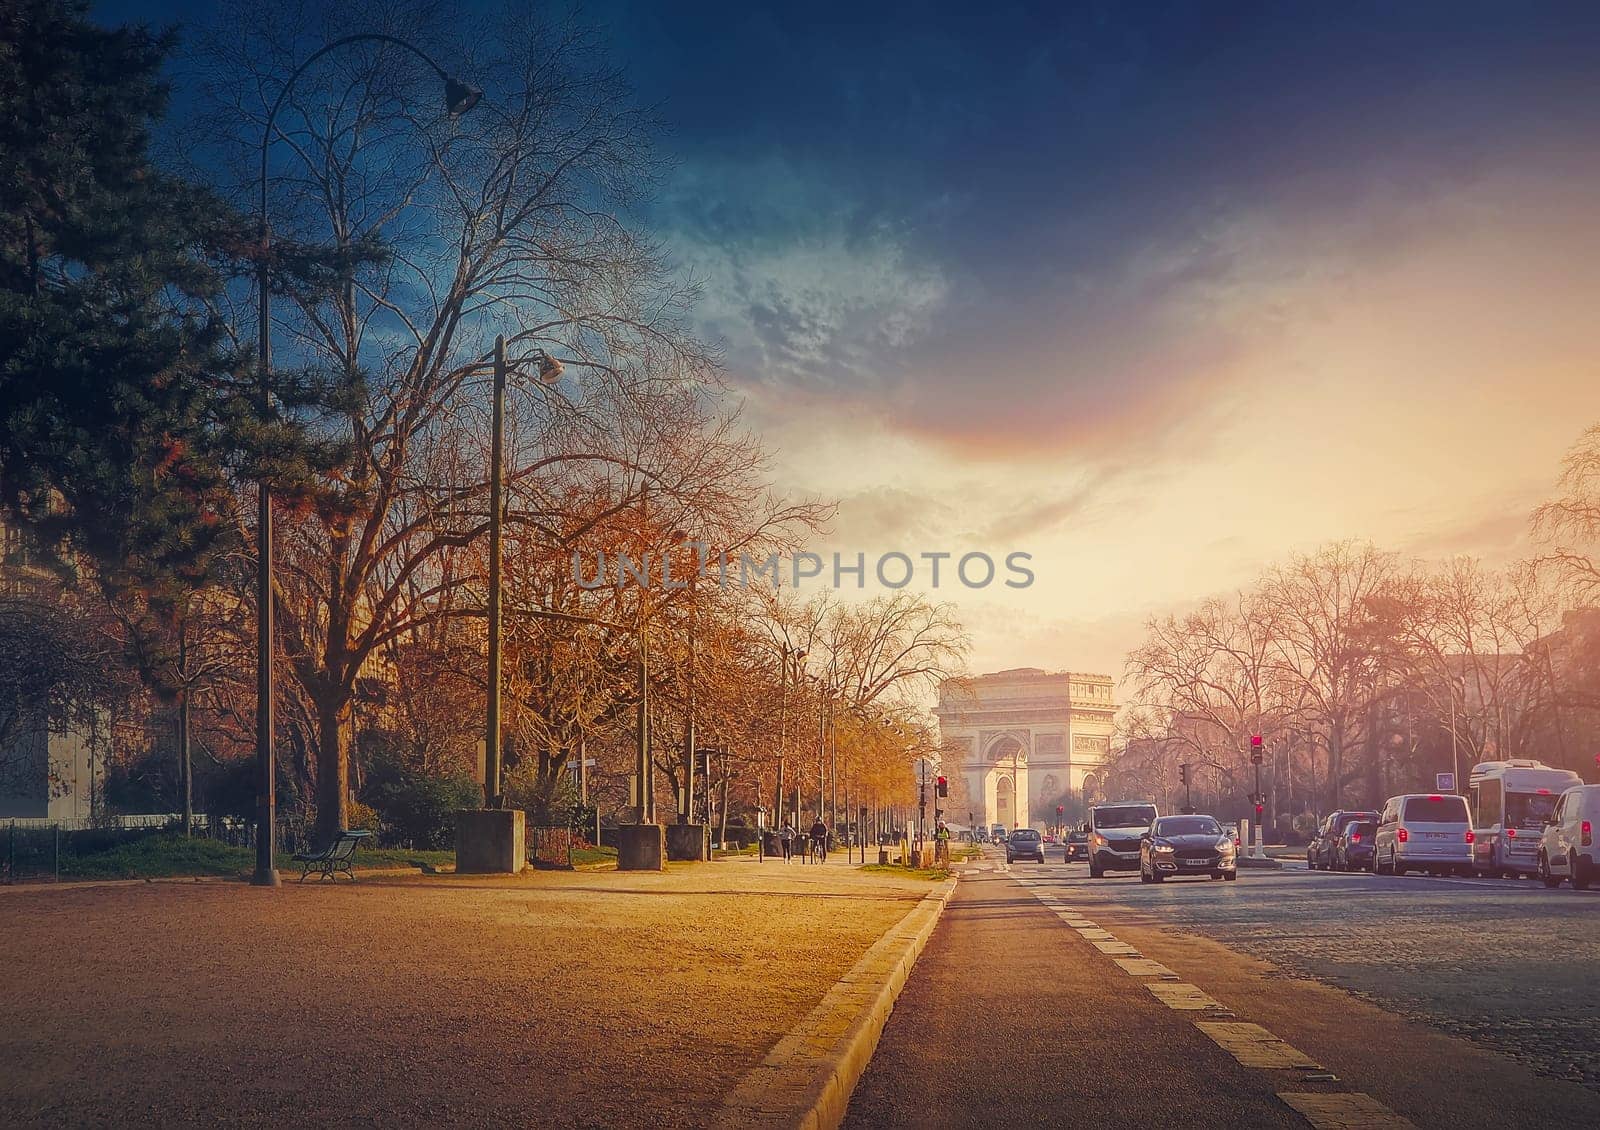 Triumphal Arch (Arc de triomphe) in Paris, France. The famous historic landmark in sunset light seen from the city street with busy traffic